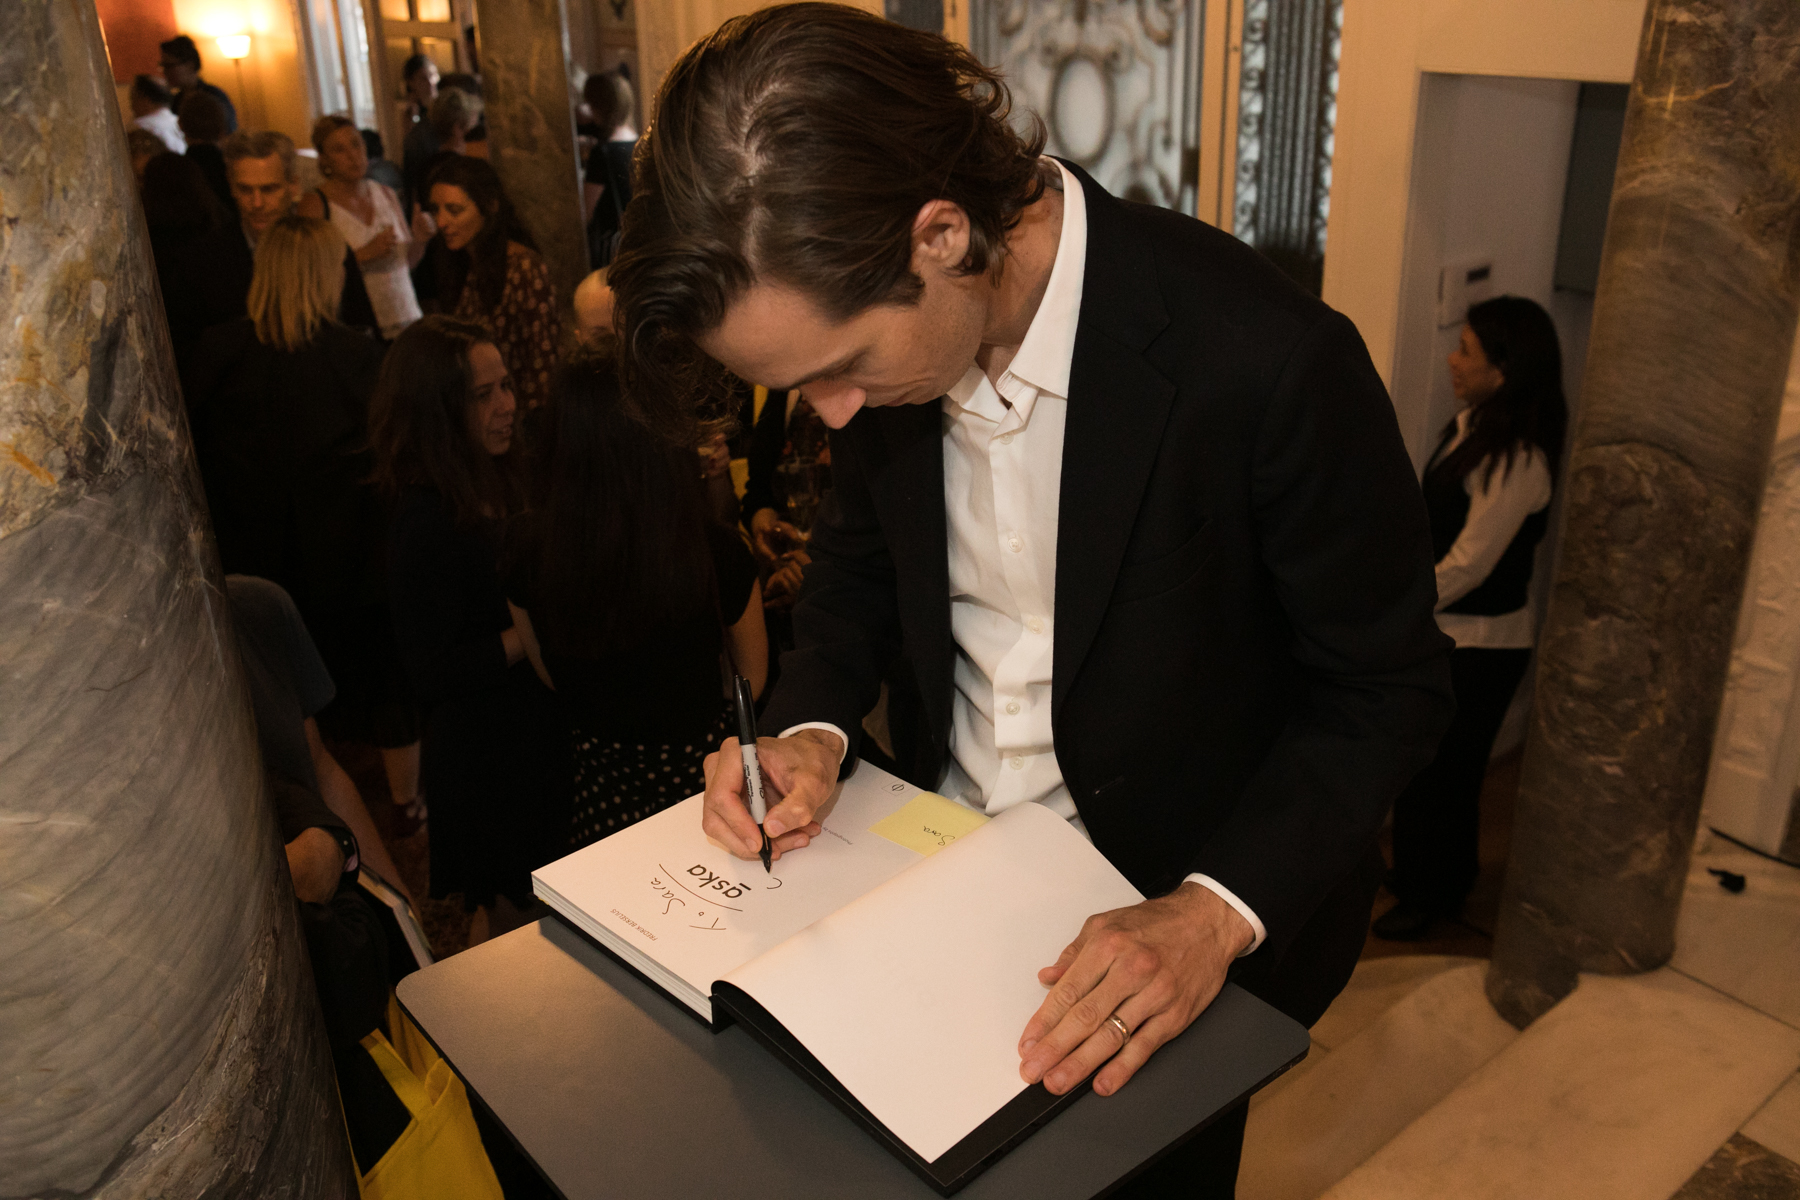 Fredrik signs a copy of his book at the Swedish residence - photo by Lauren Silberman/Consulate General of Sweden in New York